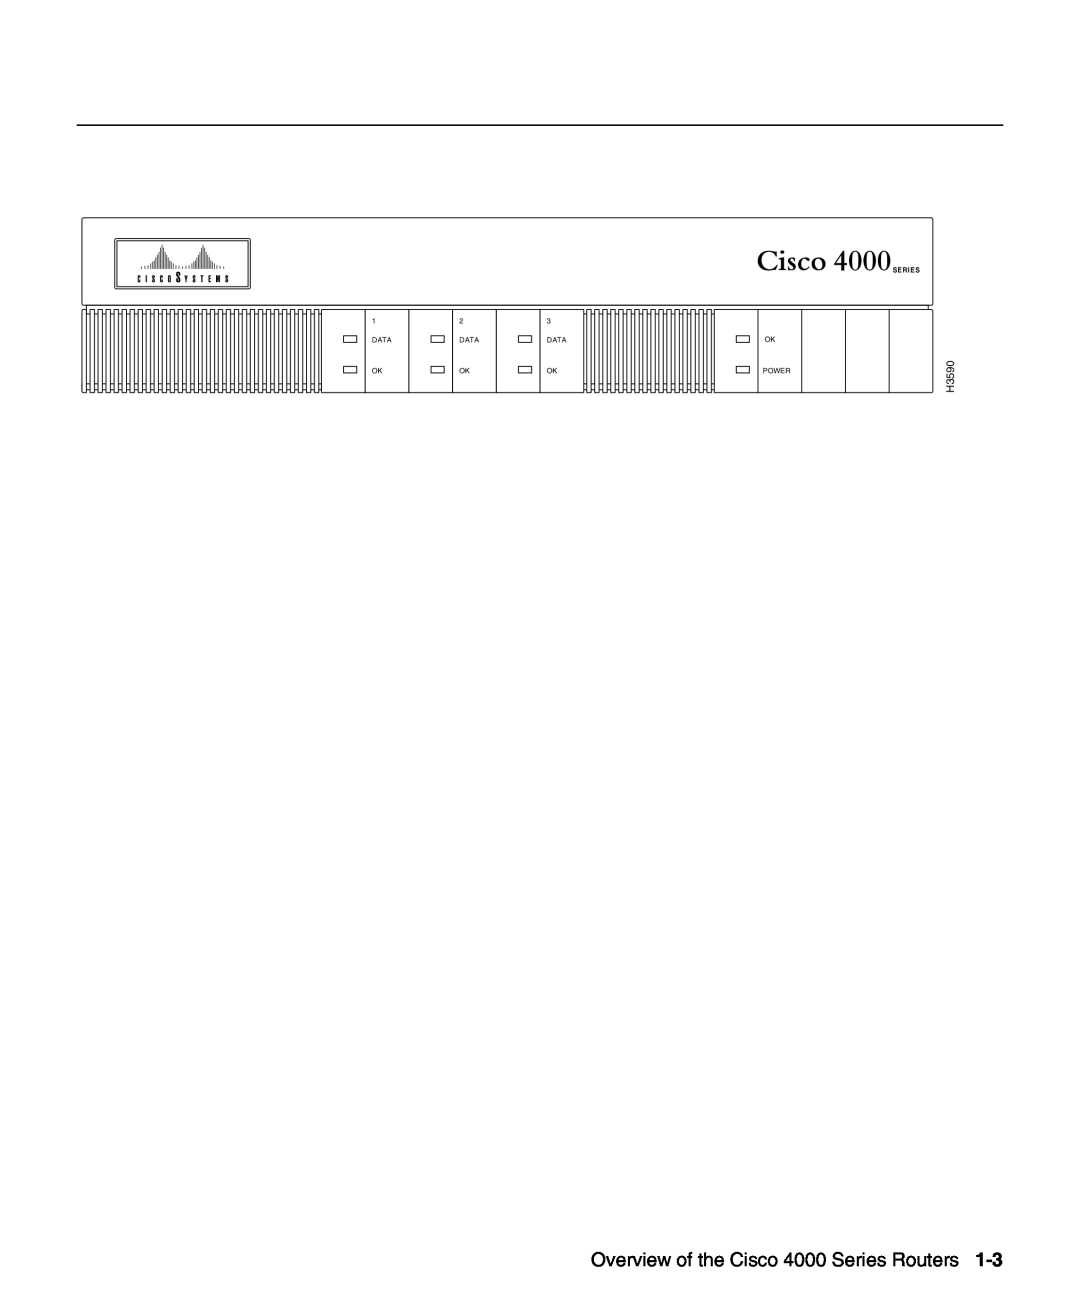 Cisco Systems manual Overview of the Cisco 4000 Series Routers, H3590, Data Ok, Ok Power 